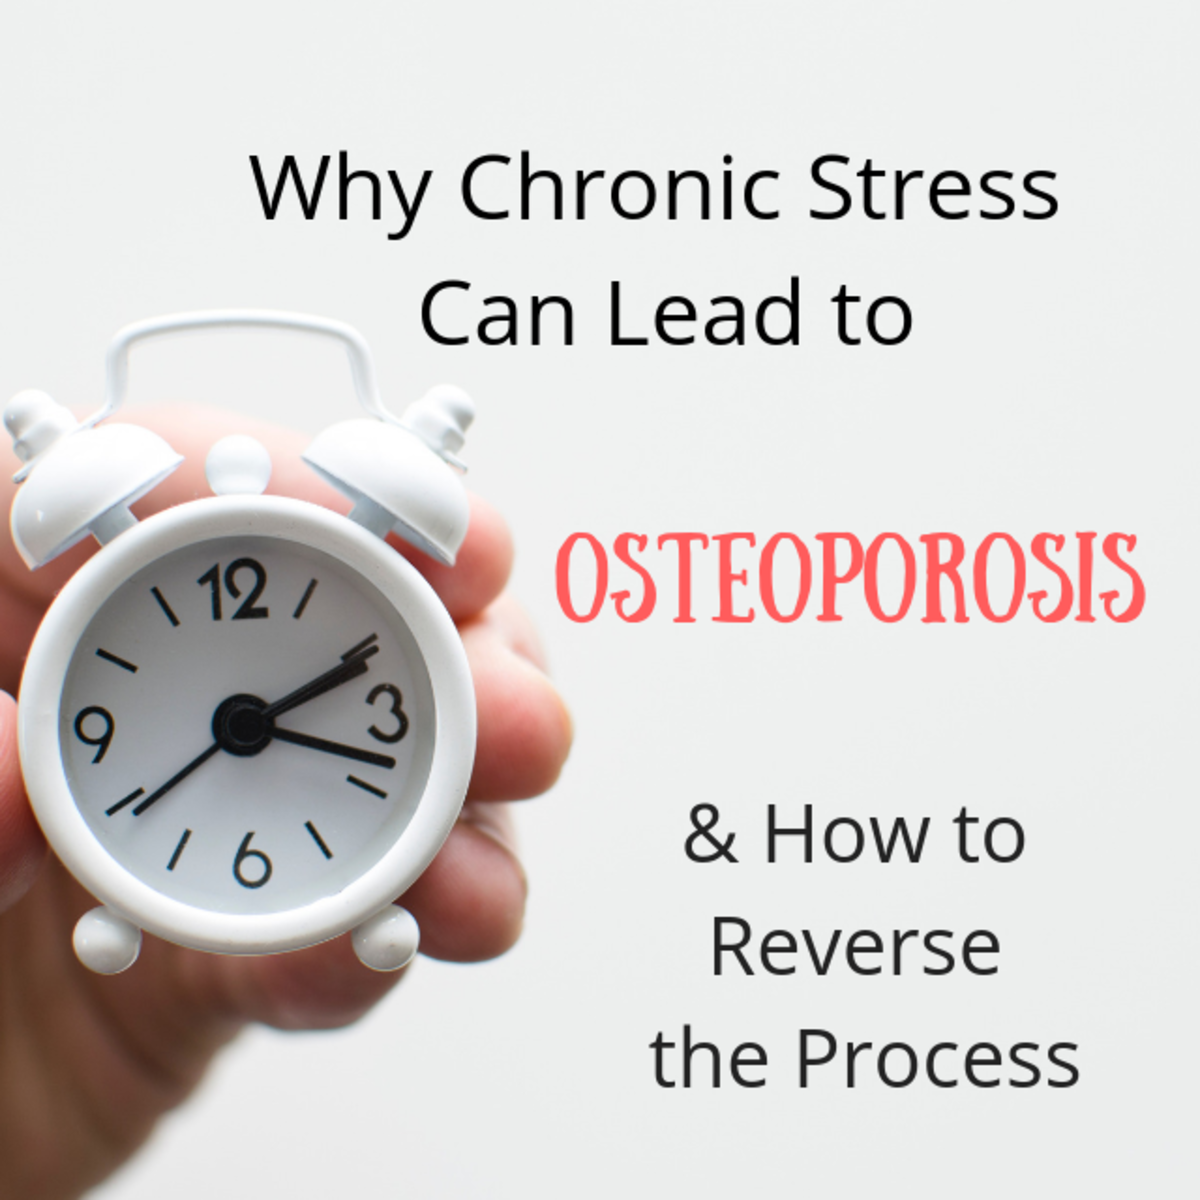 Why Chronic Stress Can Lead to Osteoporosis and How to Reverse the Process